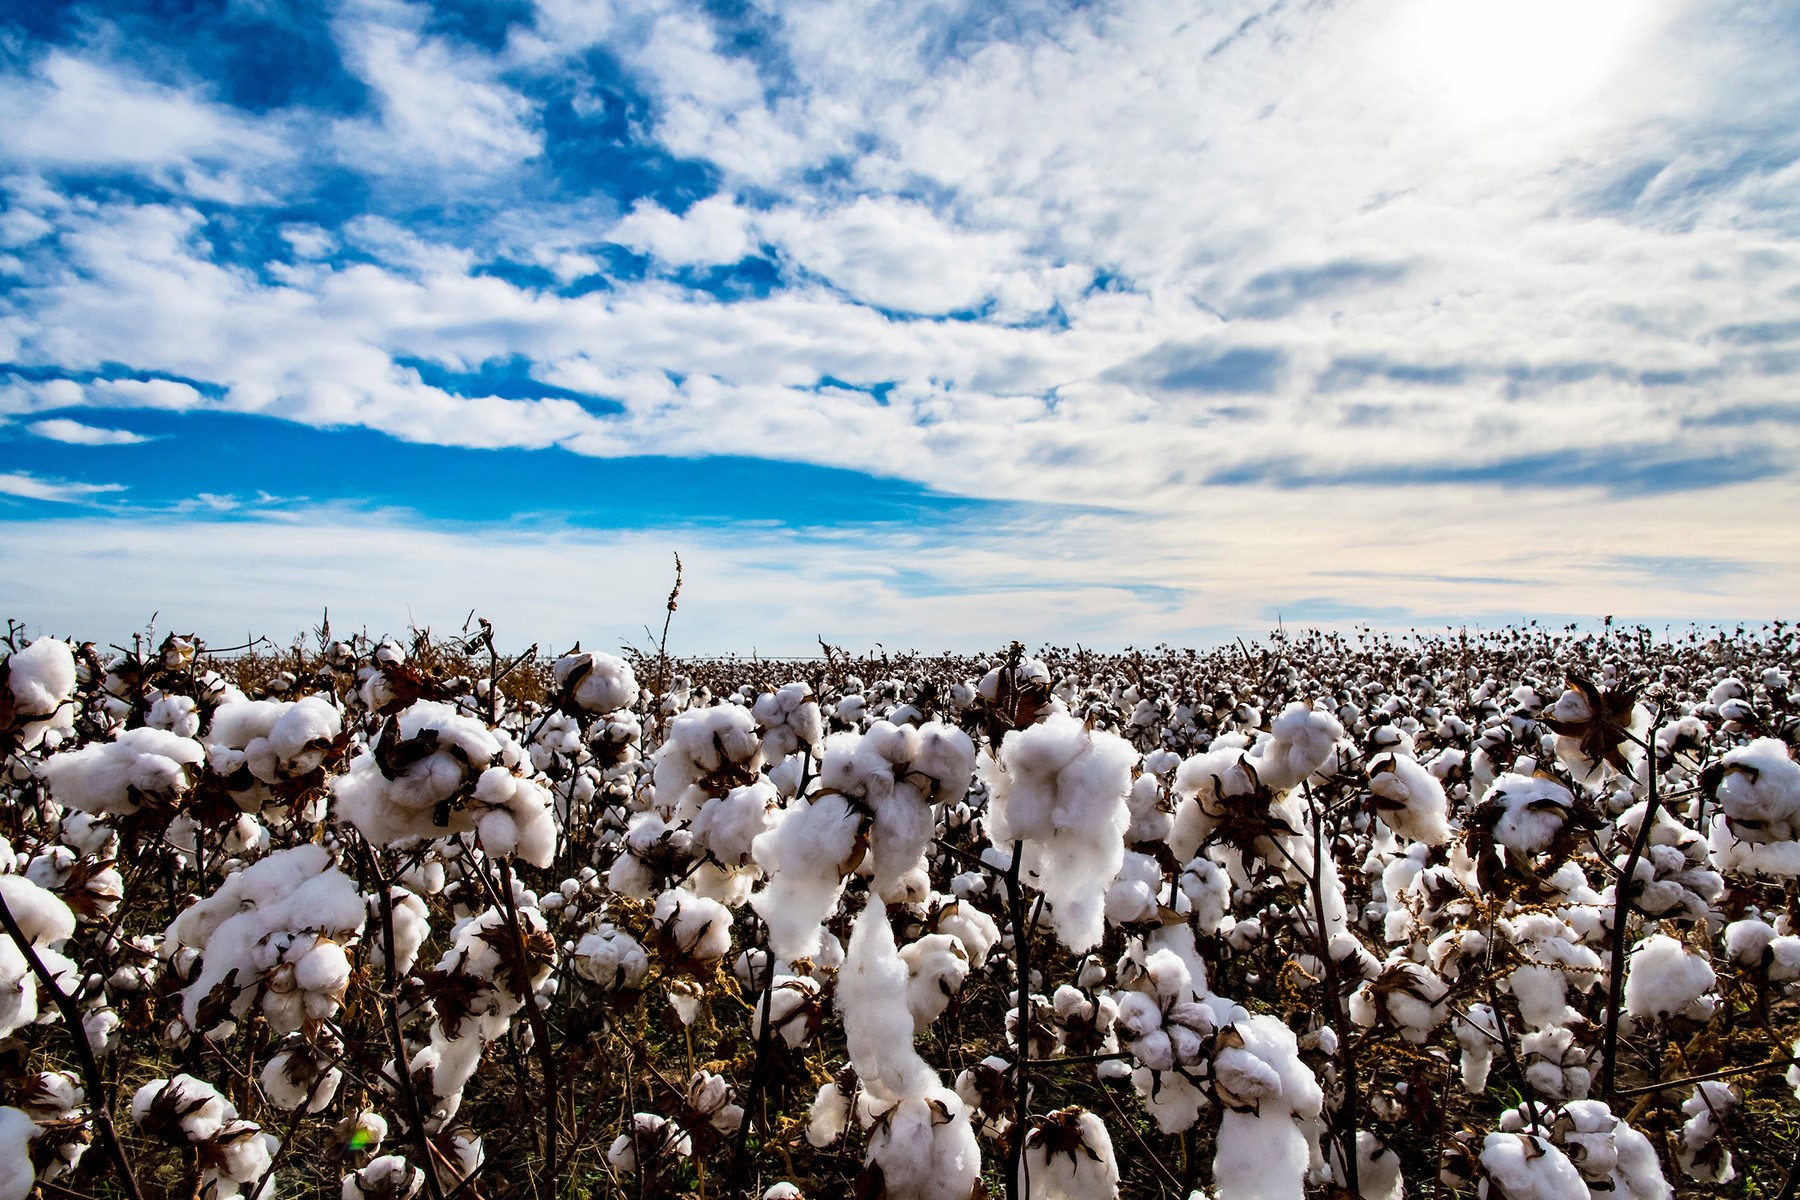 Mark Nichols, Phil Bohl of Oklahoma Elected as State Producer Chairmen for National Cotton Council